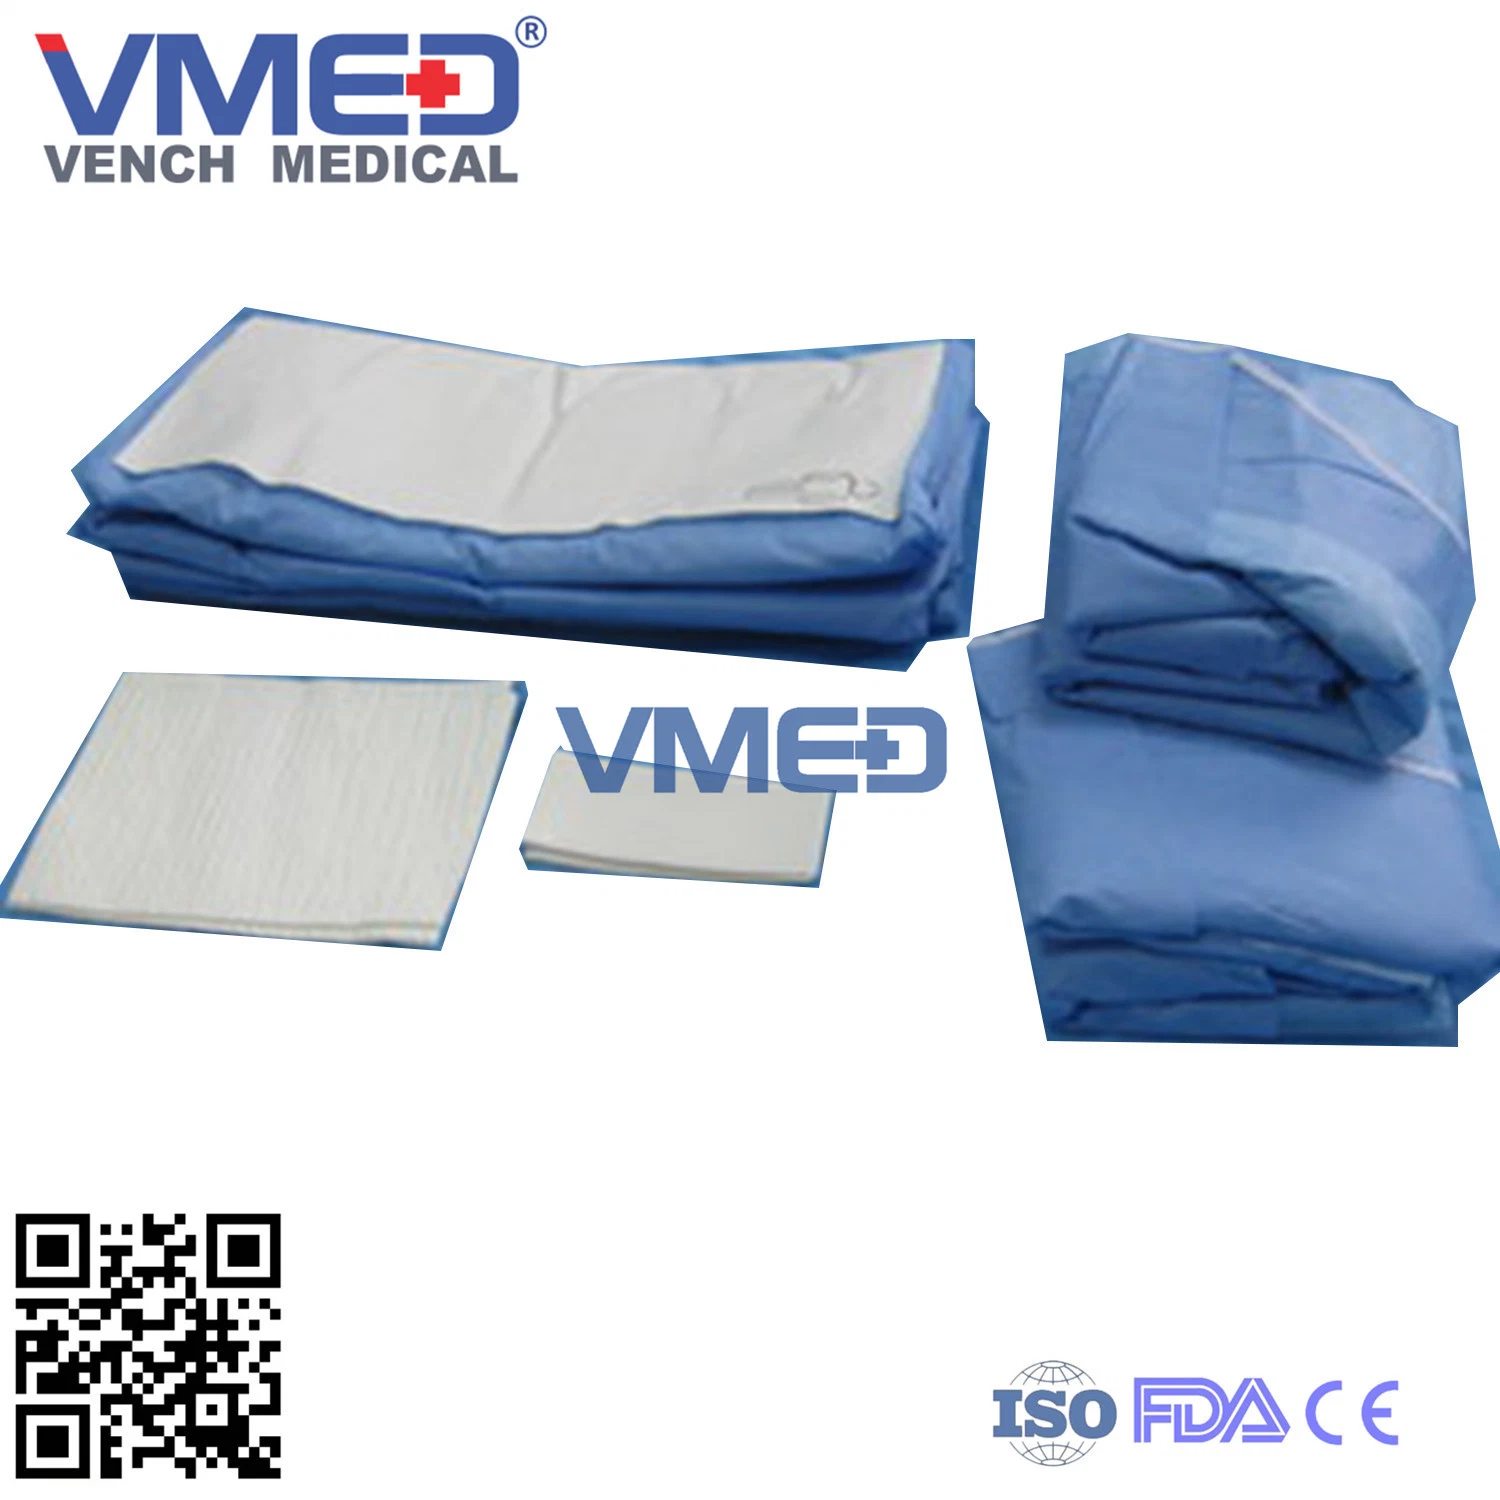 Disposable Hospital Nonwoven Material Sterile General /Universal Surgical Pack, Drape Pack with Fenestration Anti Bacteria Universal General Surgical Pack